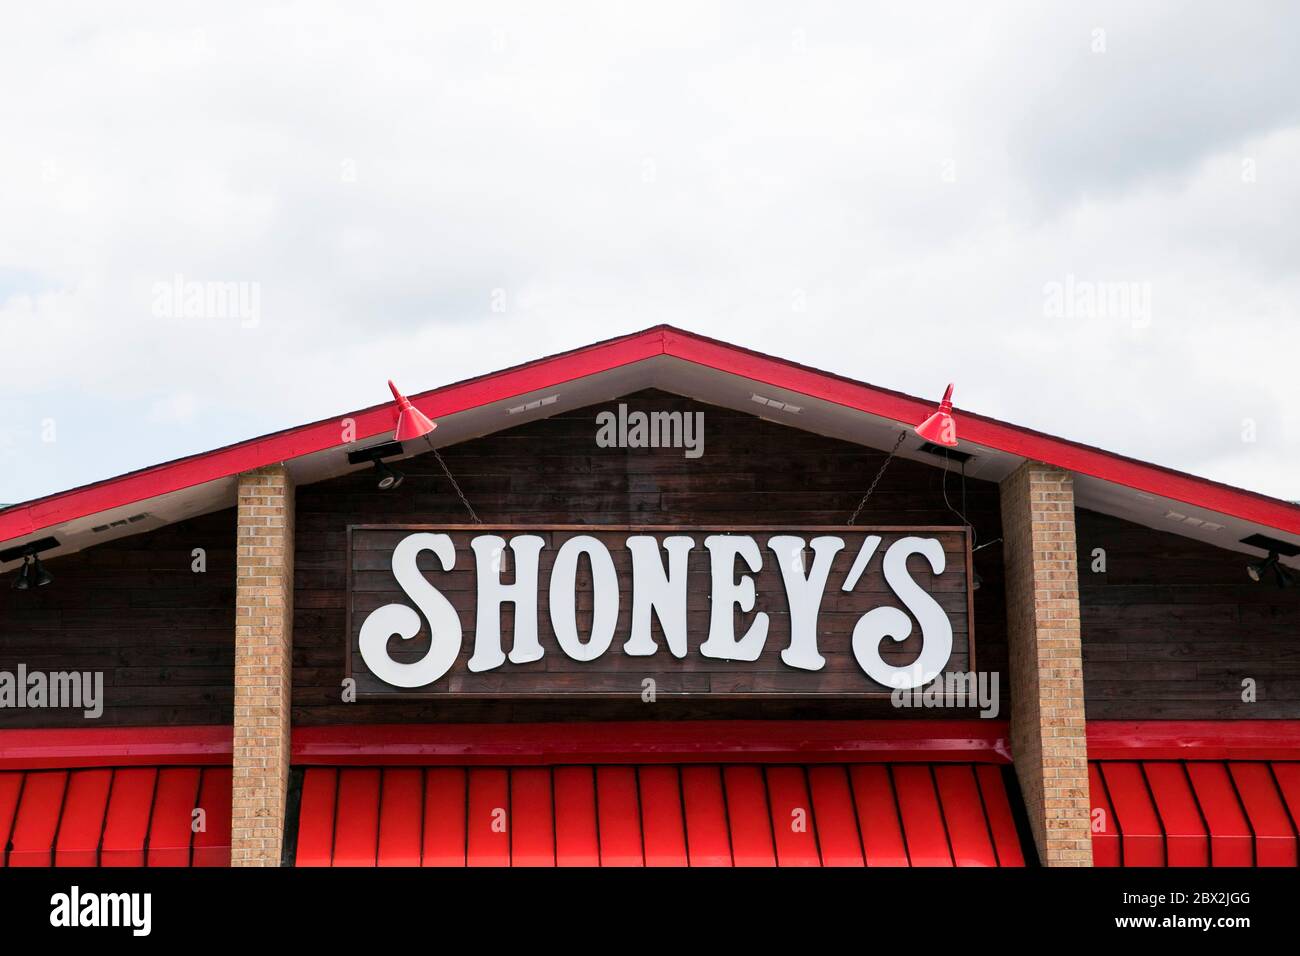 A logo sign outside of a Shoney's restaurant location in Charleston, West Virginia on May 29, 2020. Stock Photo